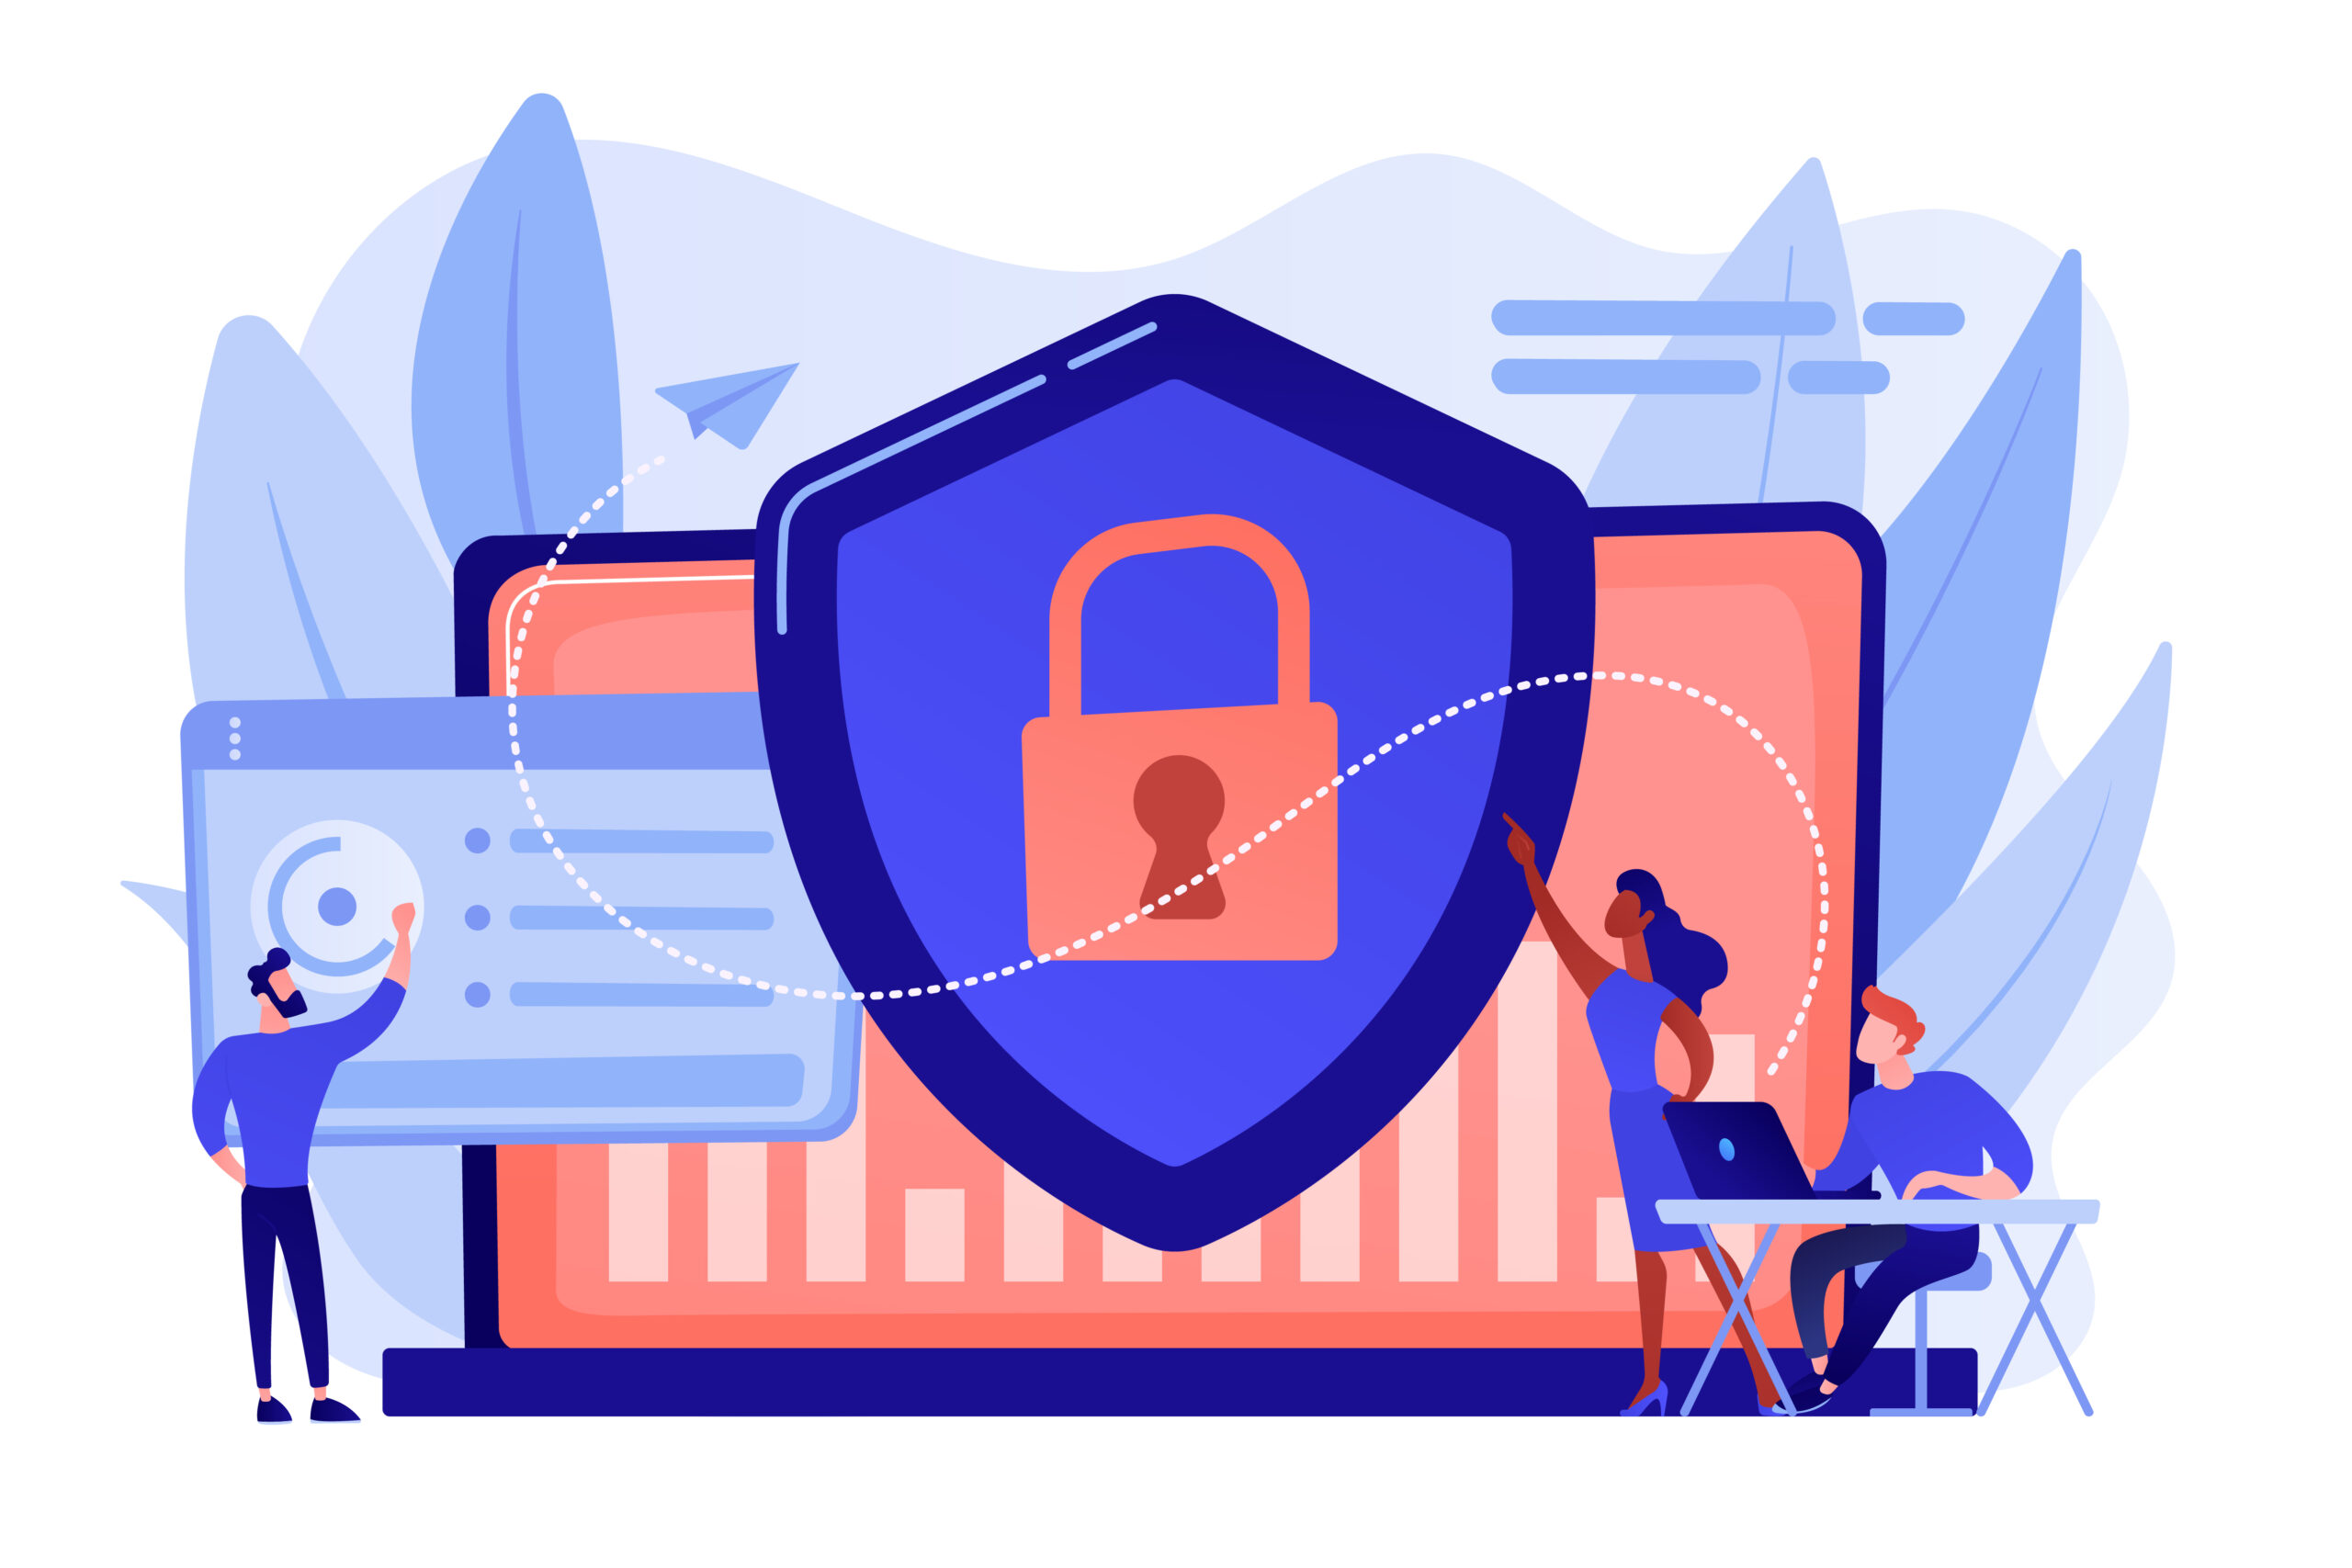 Leanmote’s data ethics: how we protect you